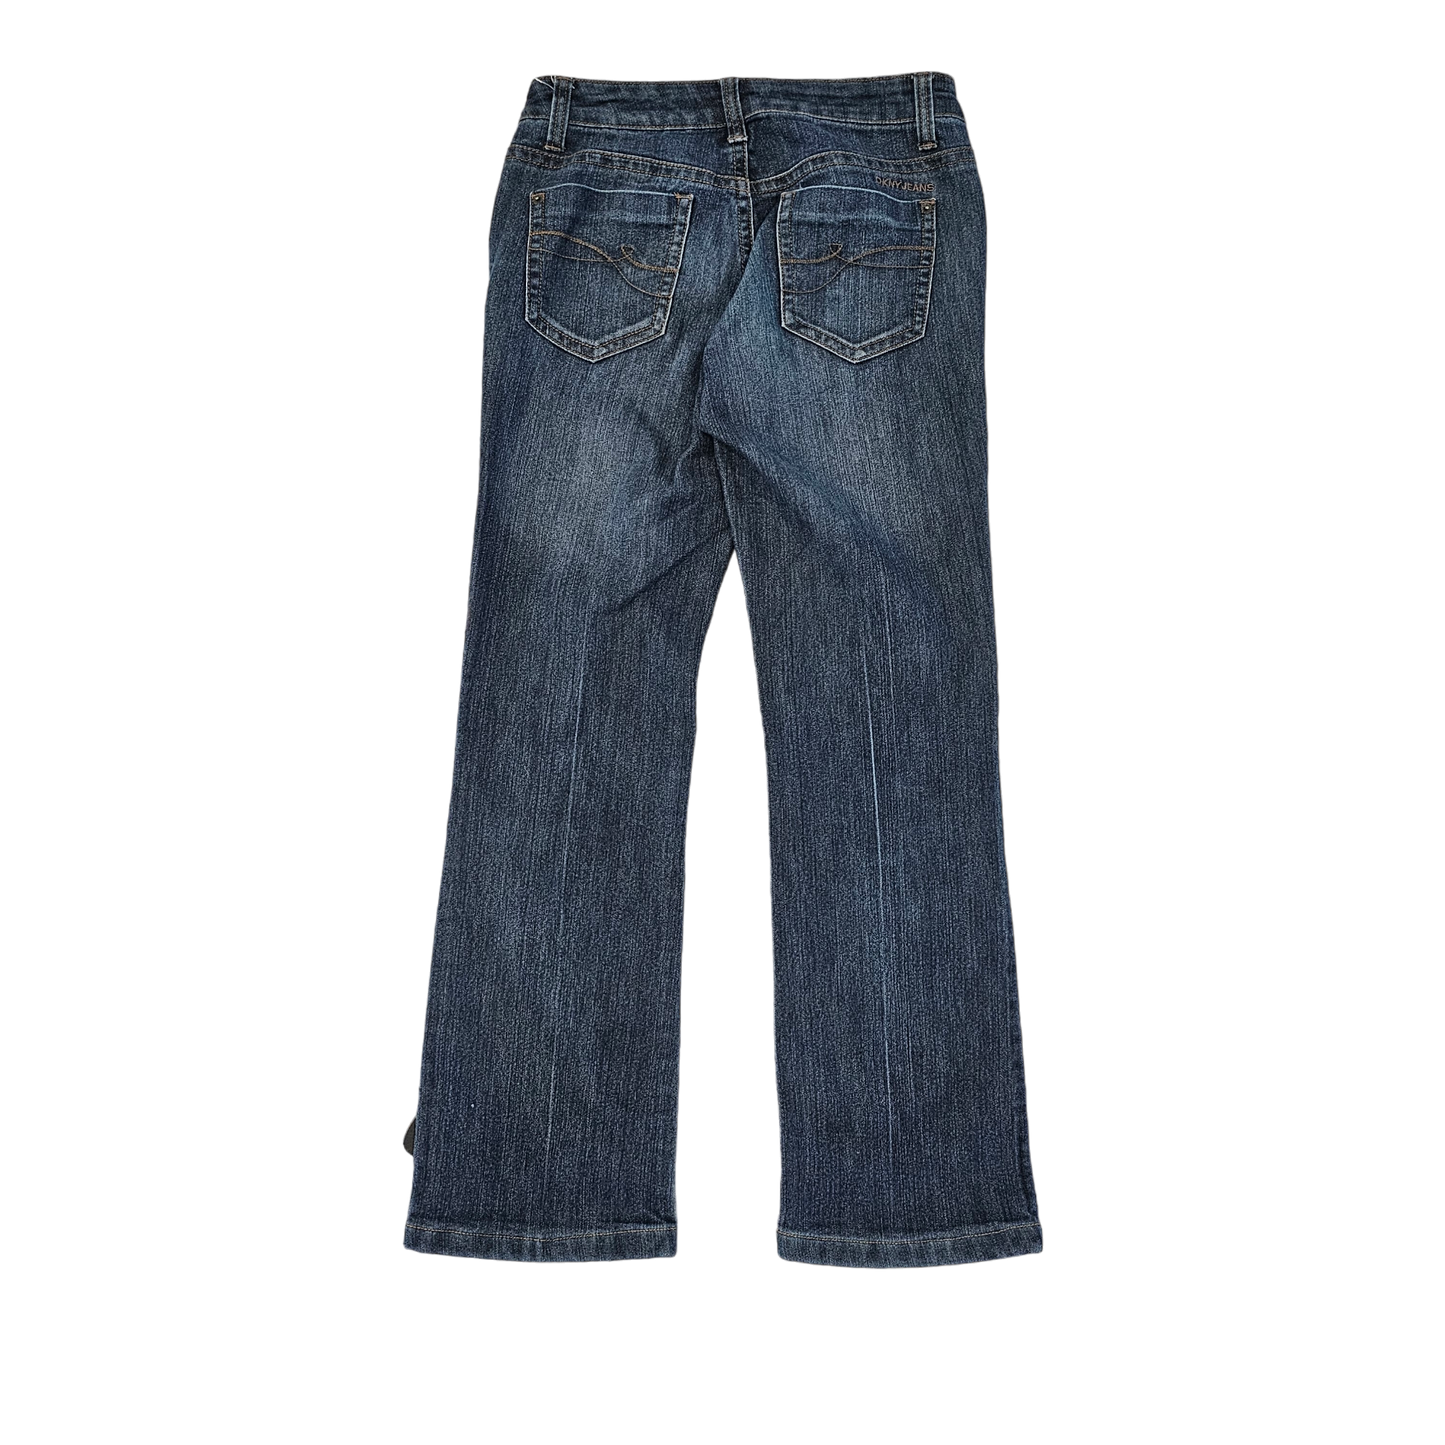 Jeans Flared By Dkny  Size: 4